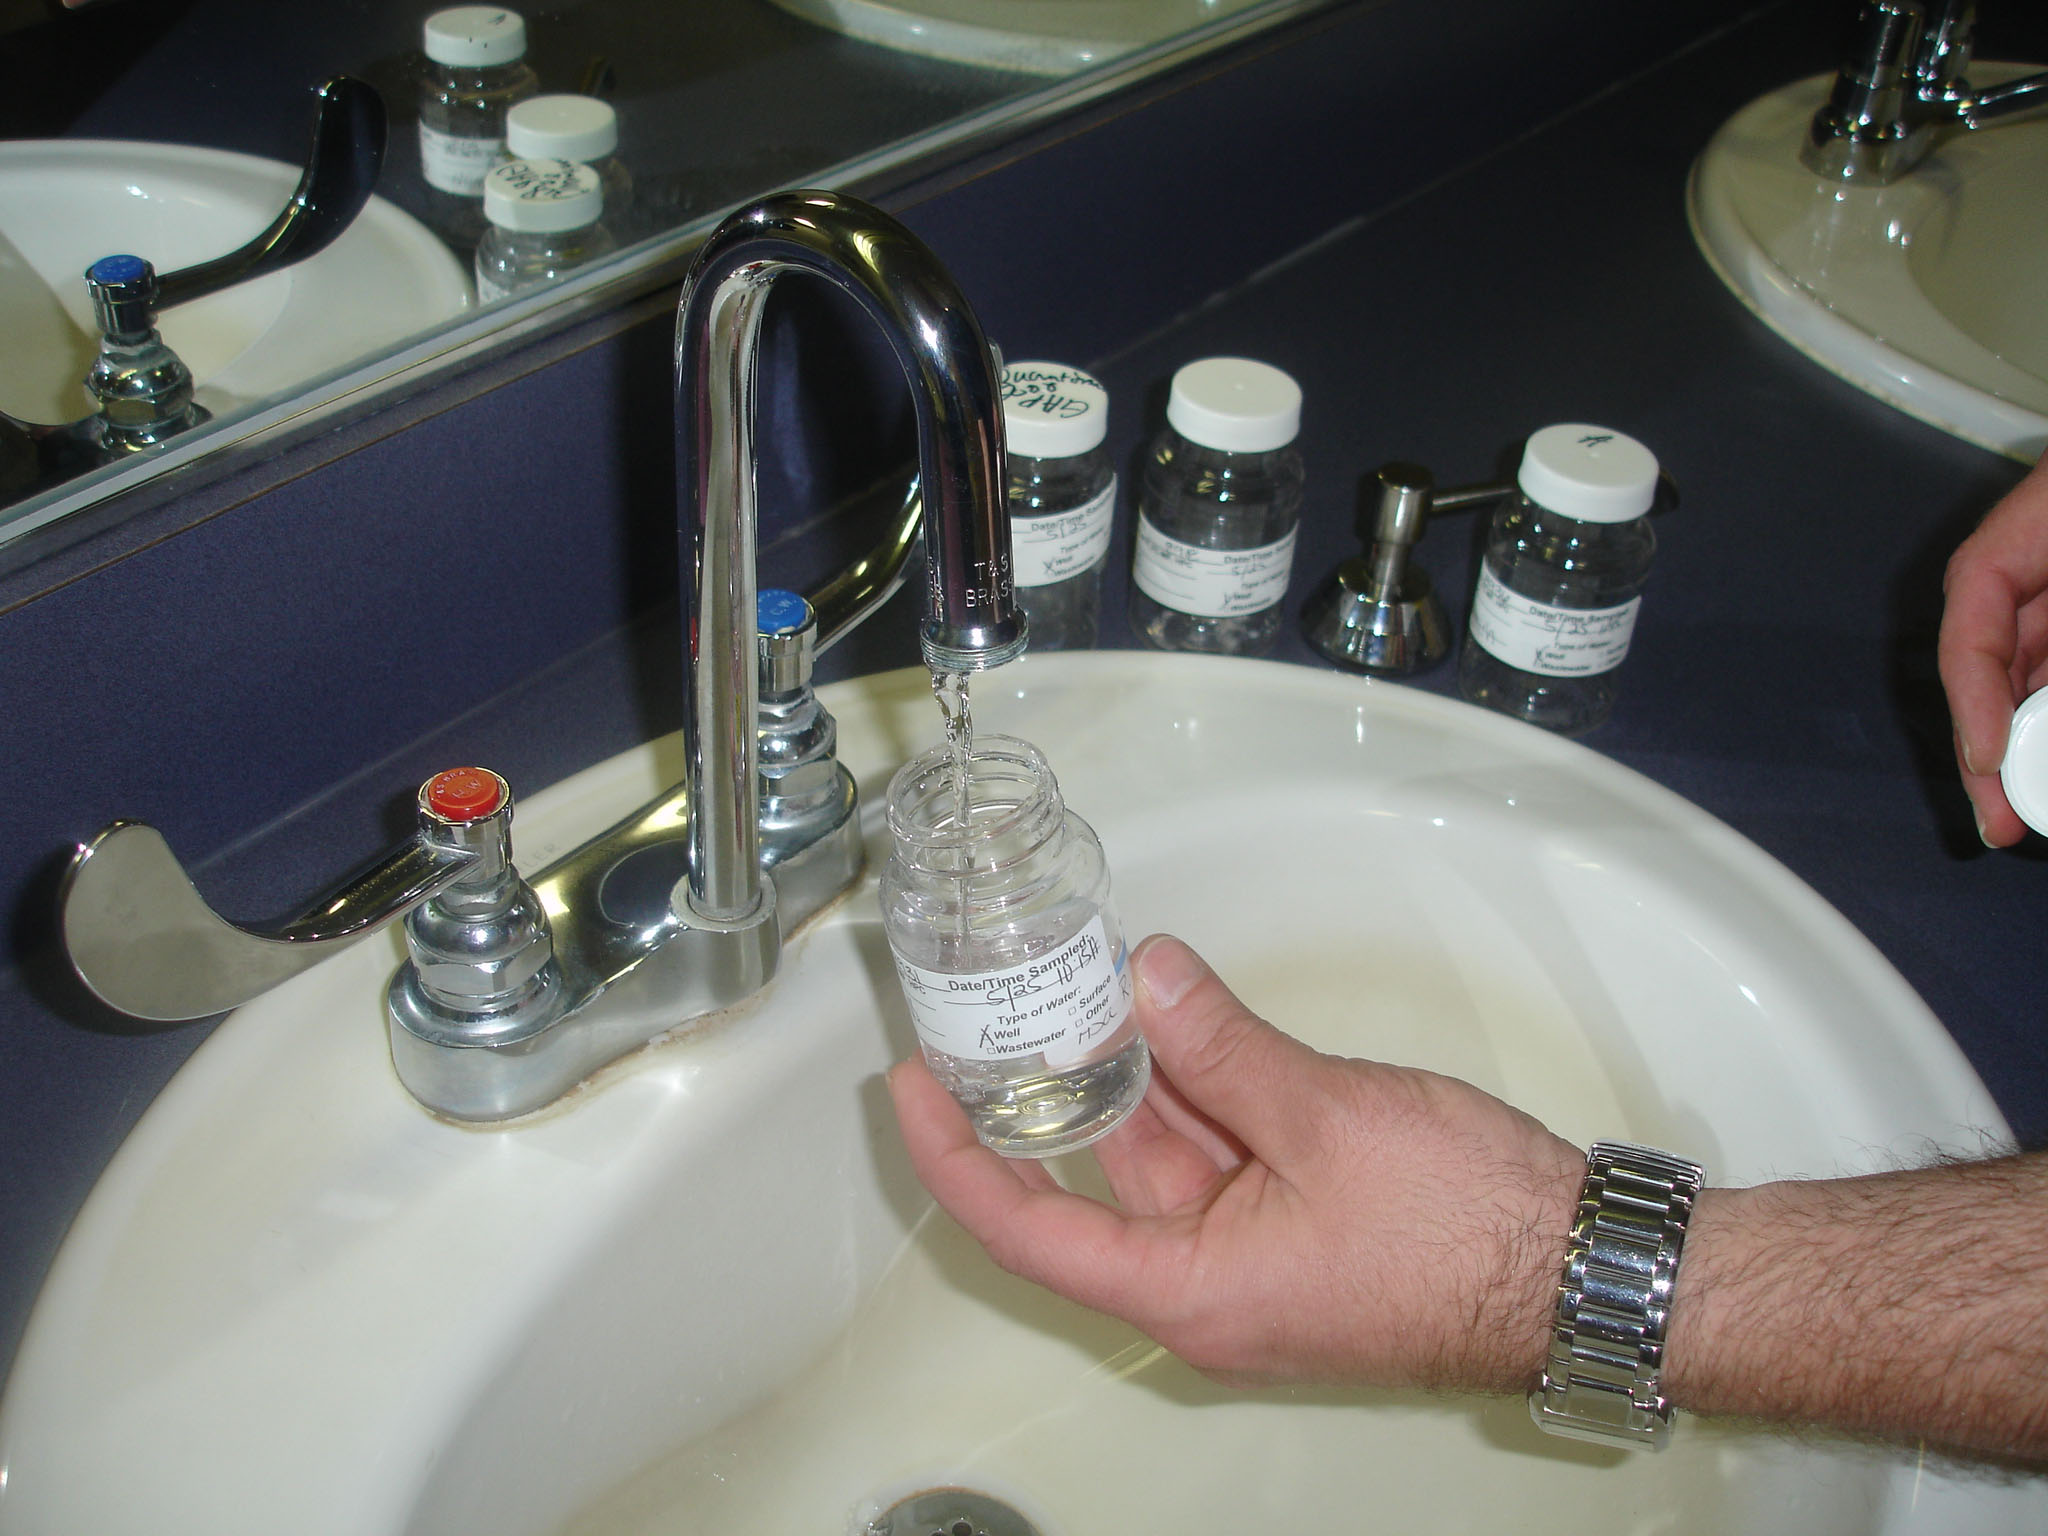 Photo showing the water sample bottle being filled with water from a faucet